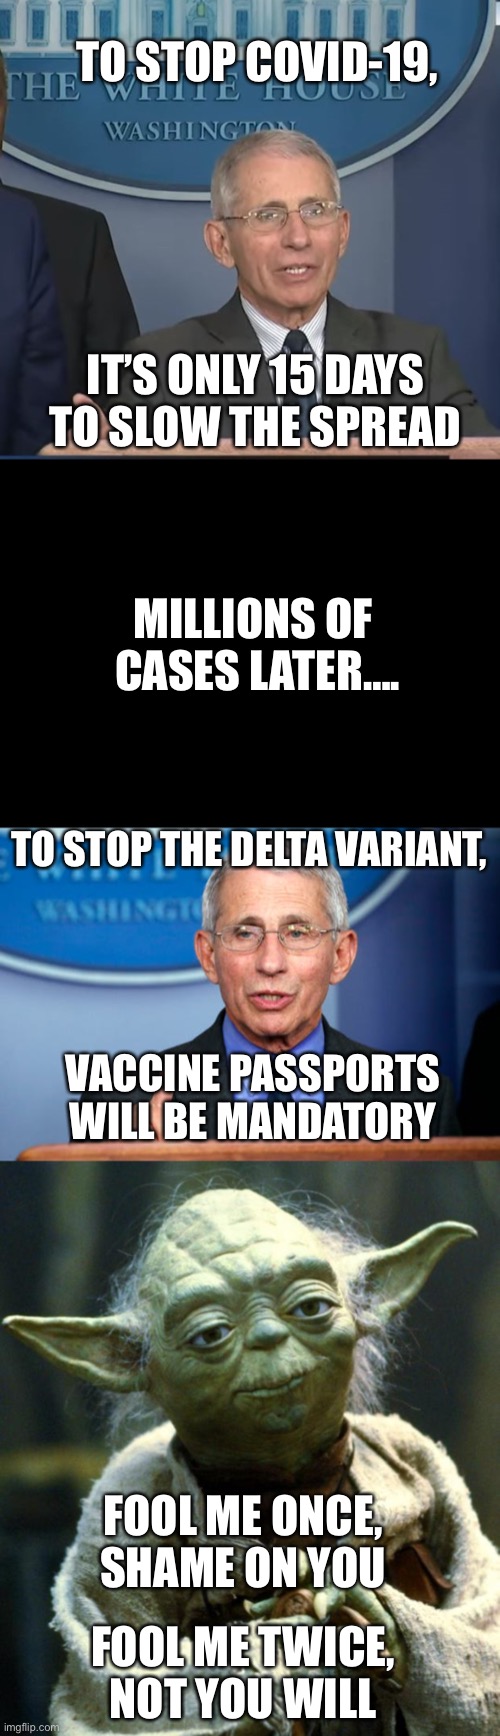 The Dr. who cried covid. | TO STOP COVID-19, IT’S ONLY 15 DAYS TO SLOW THE SPREAD; MILLIONS OF 
CASES LATER…. TO STOP THE DELTA VARIANT, VACCINE PASSPORTS WILL BE MANDATORY; FOOL ME ONCE, SHAME ON YOU; FOOL ME TWICE, NOT YOU WILL | image tagged in dr fauci,star wars yoda,cry wolf,fool me once,fool me twice | made w/ Imgflip meme maker